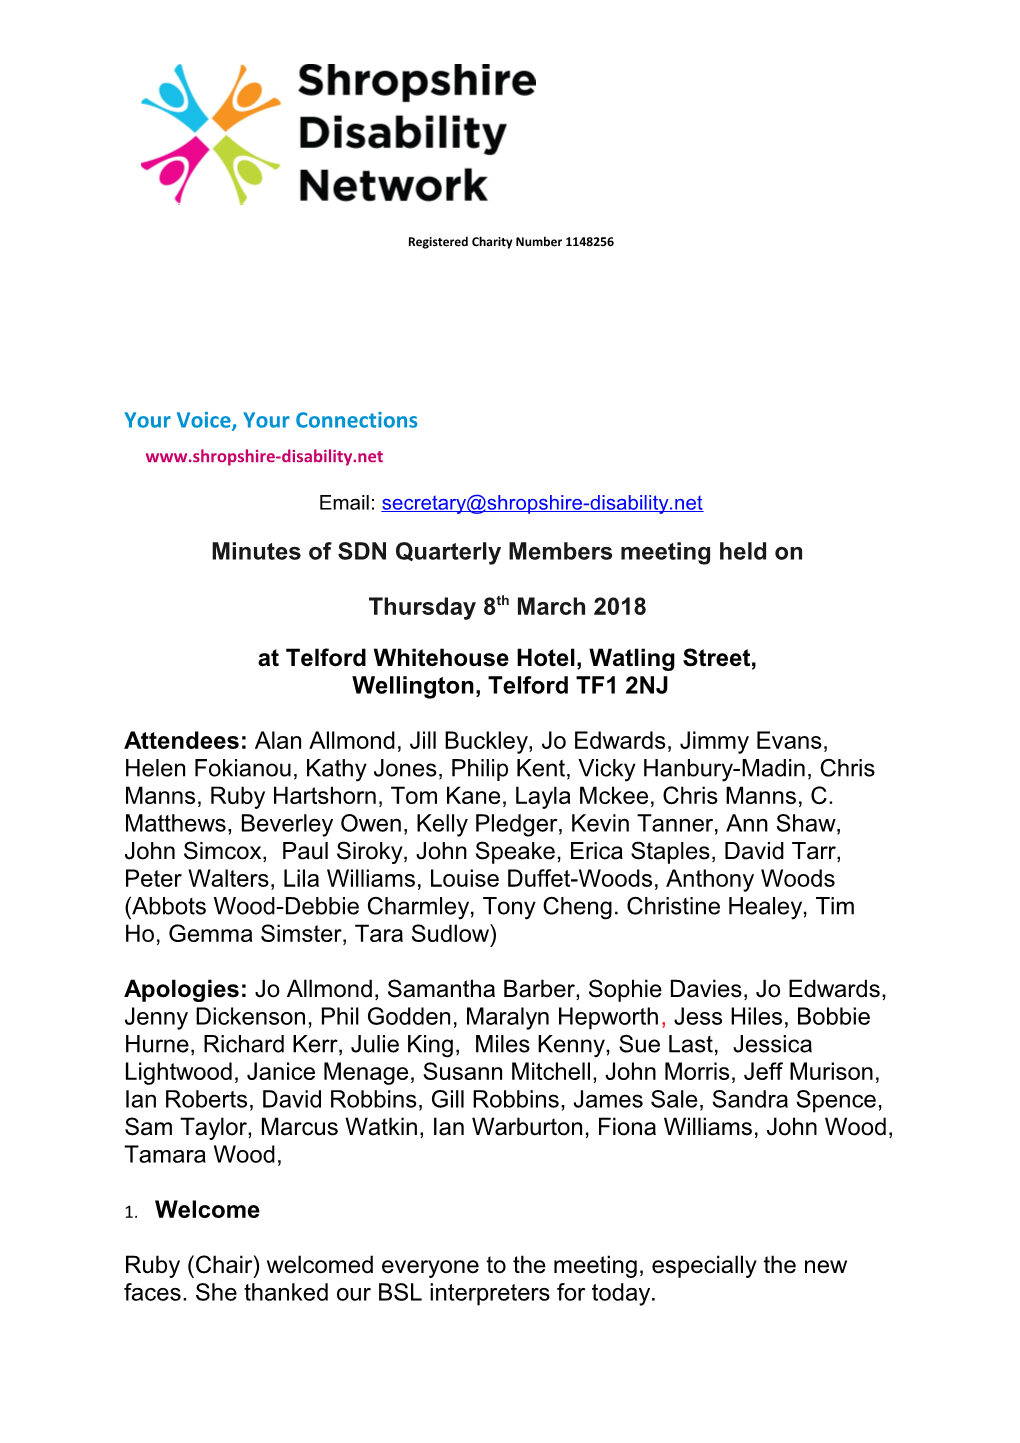 Minutes of SDN Quarterly Members Meeting Held On